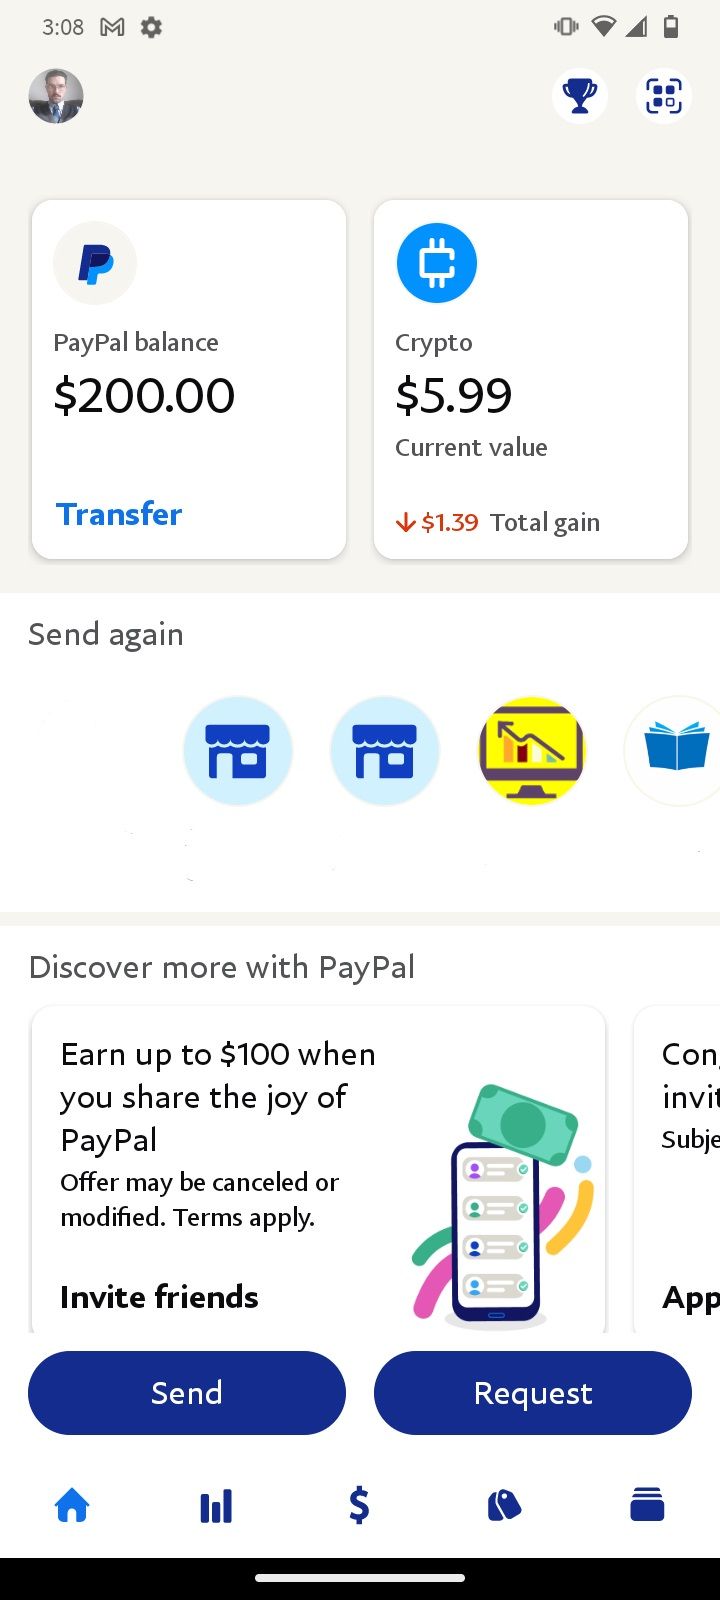 The main dashboard of the PayPal Mobile App